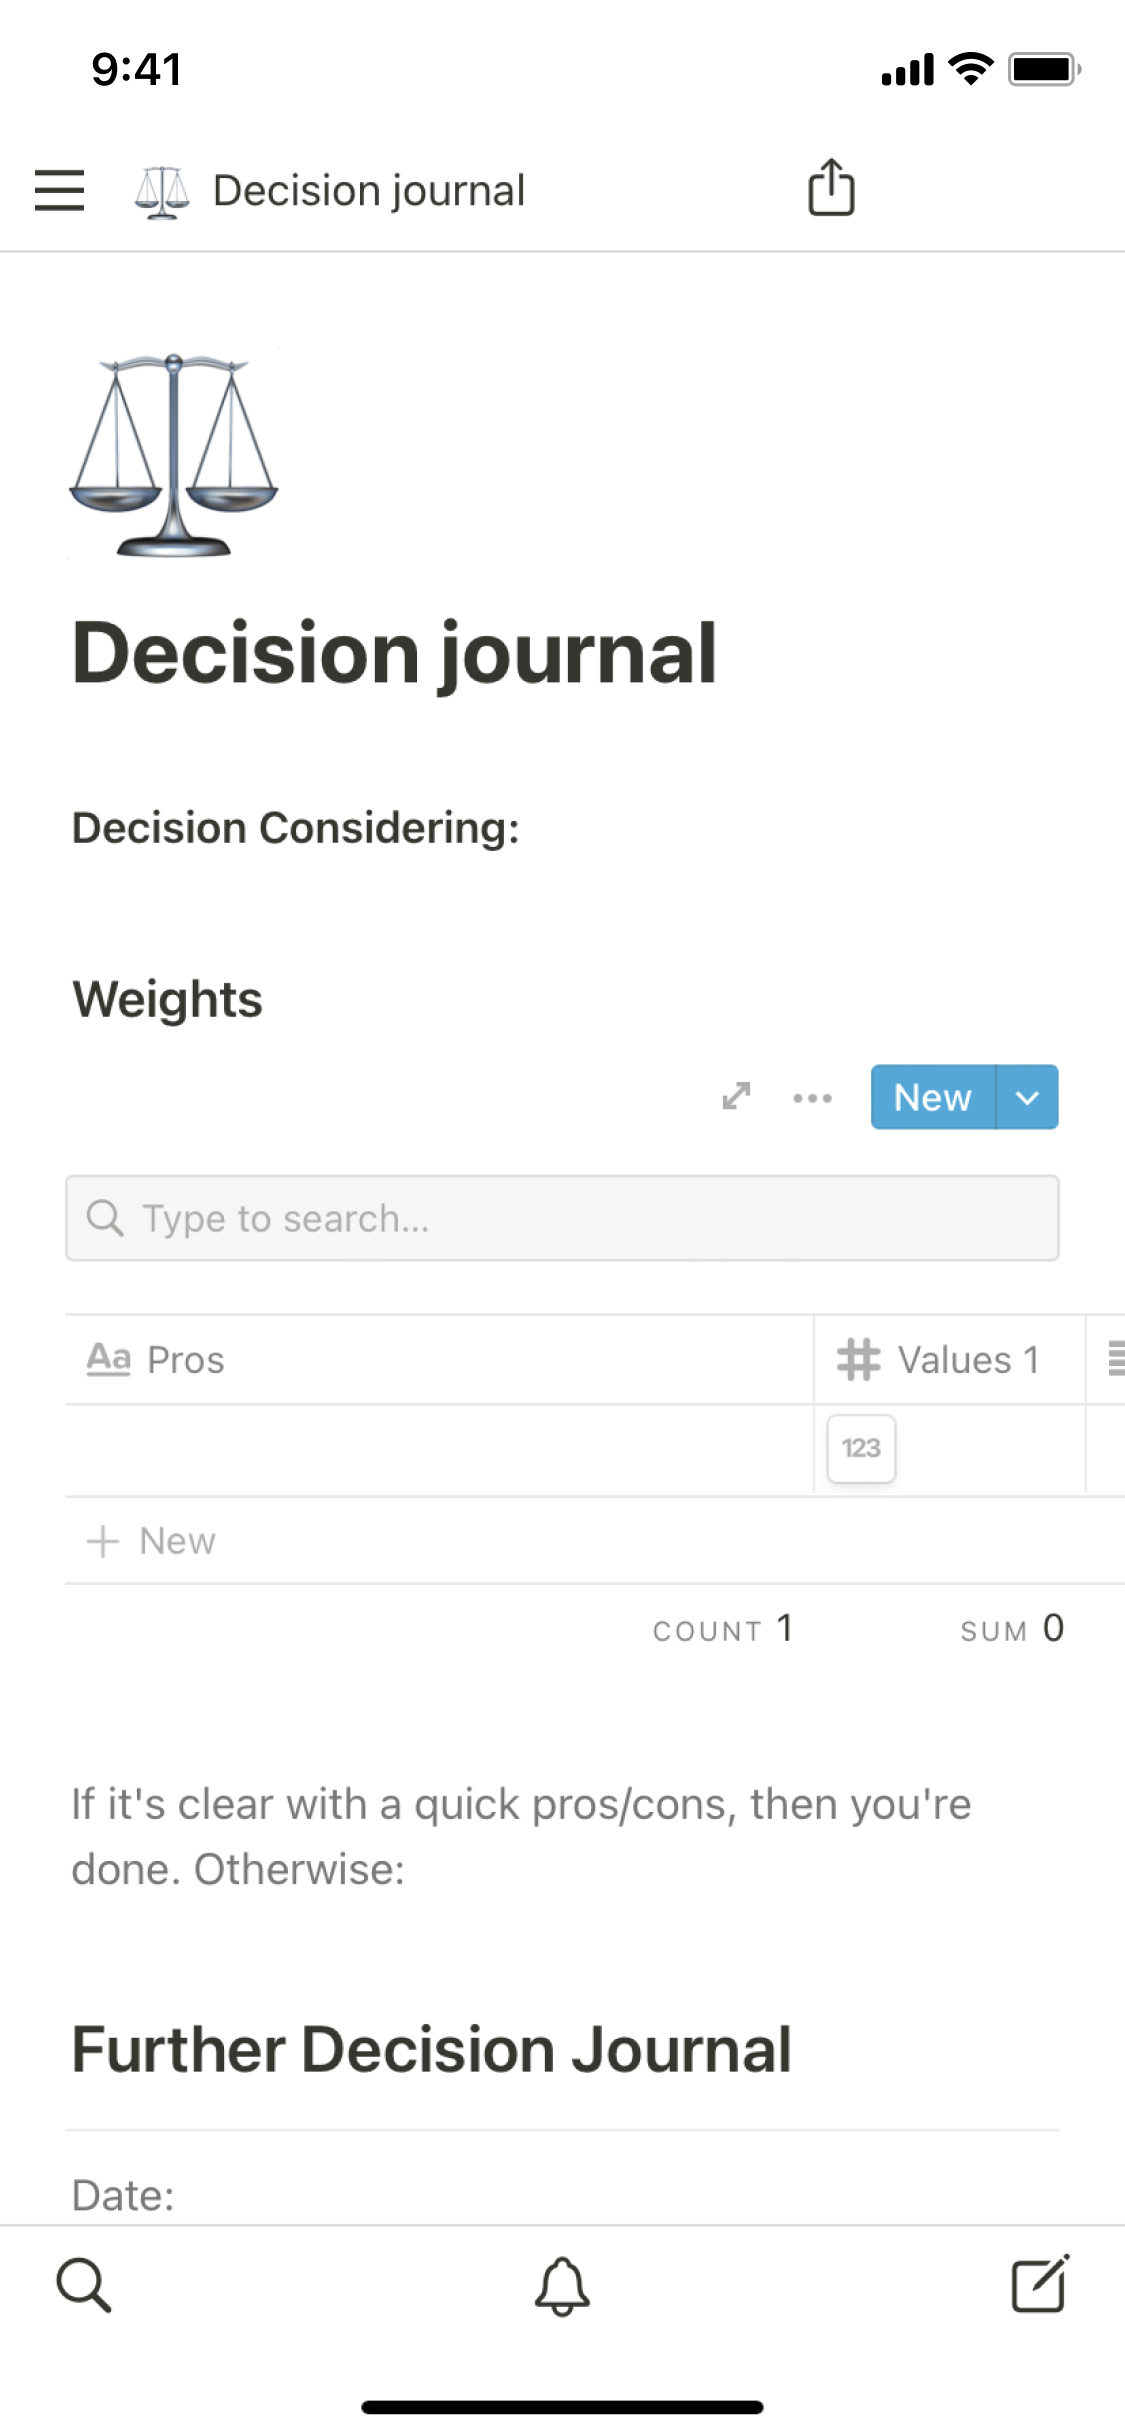 The mobile image for the Decision journal template